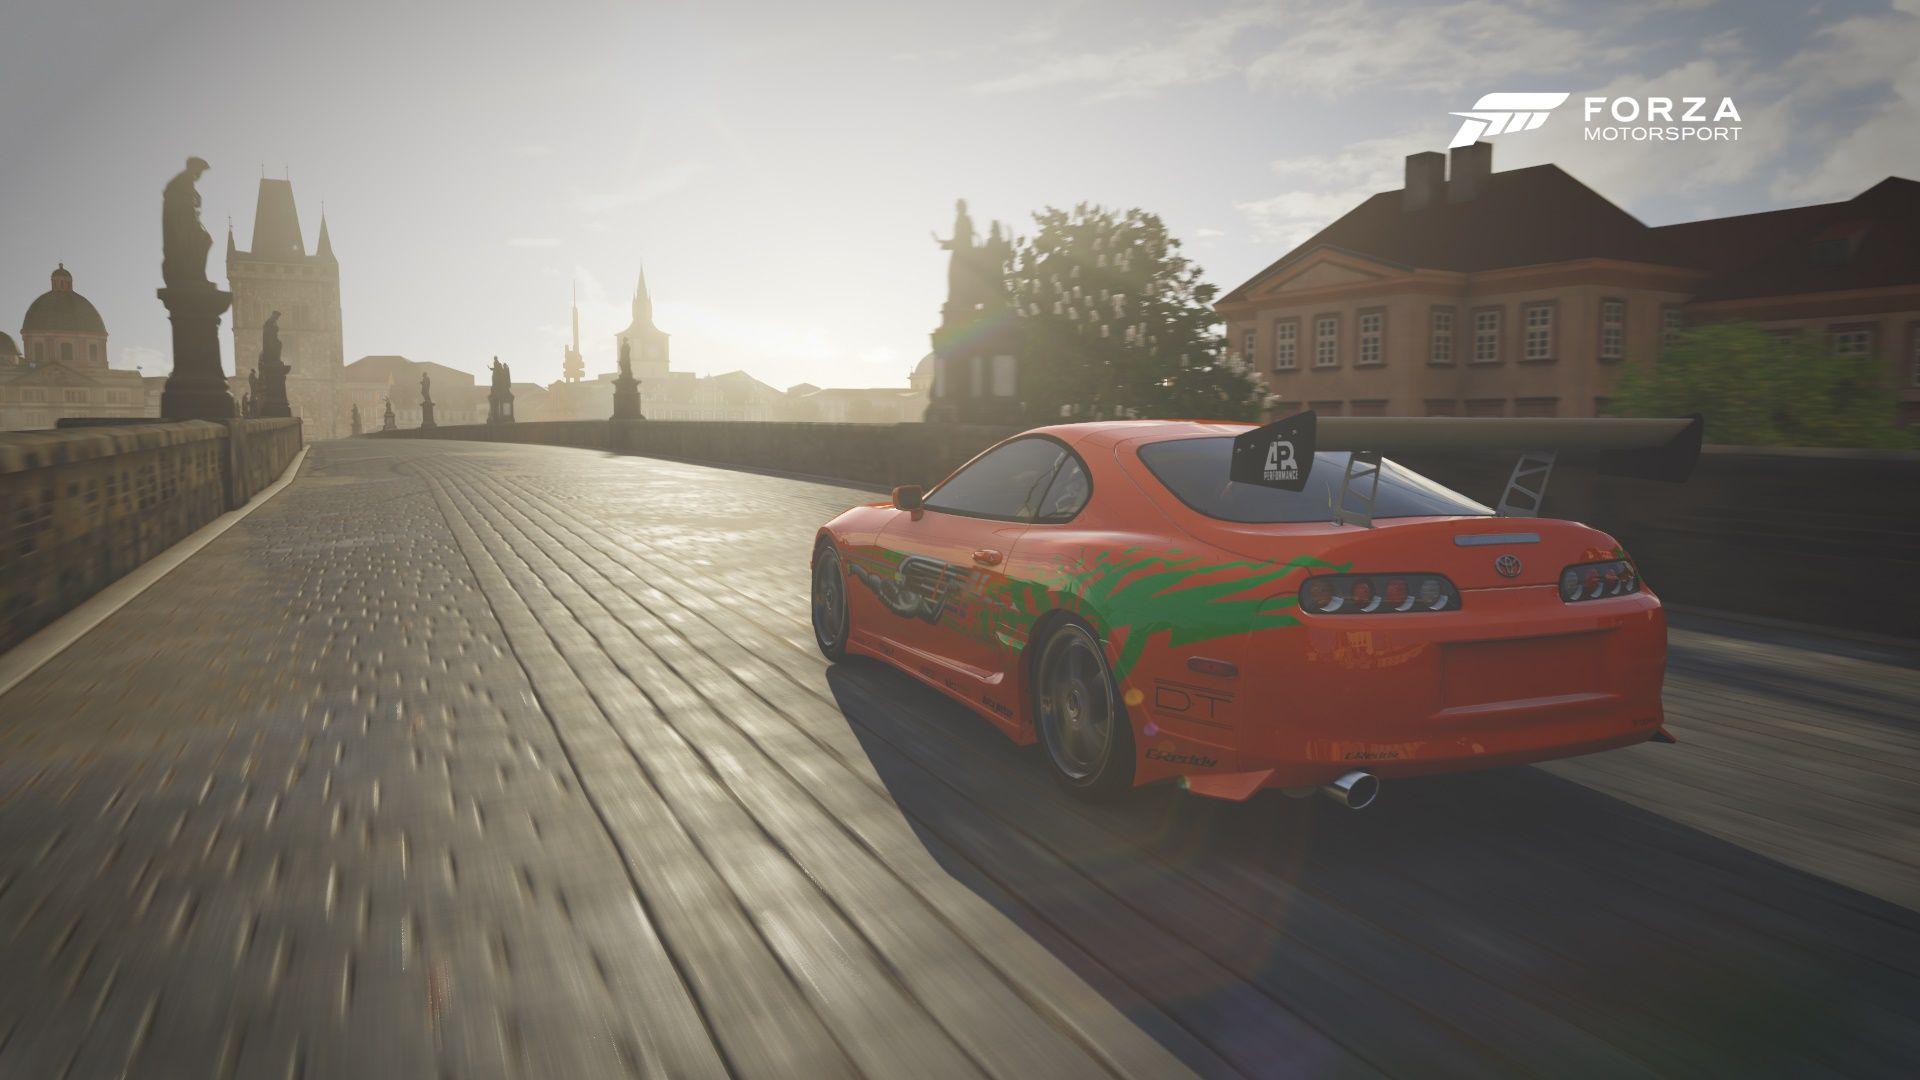 See You Again at Forza 6